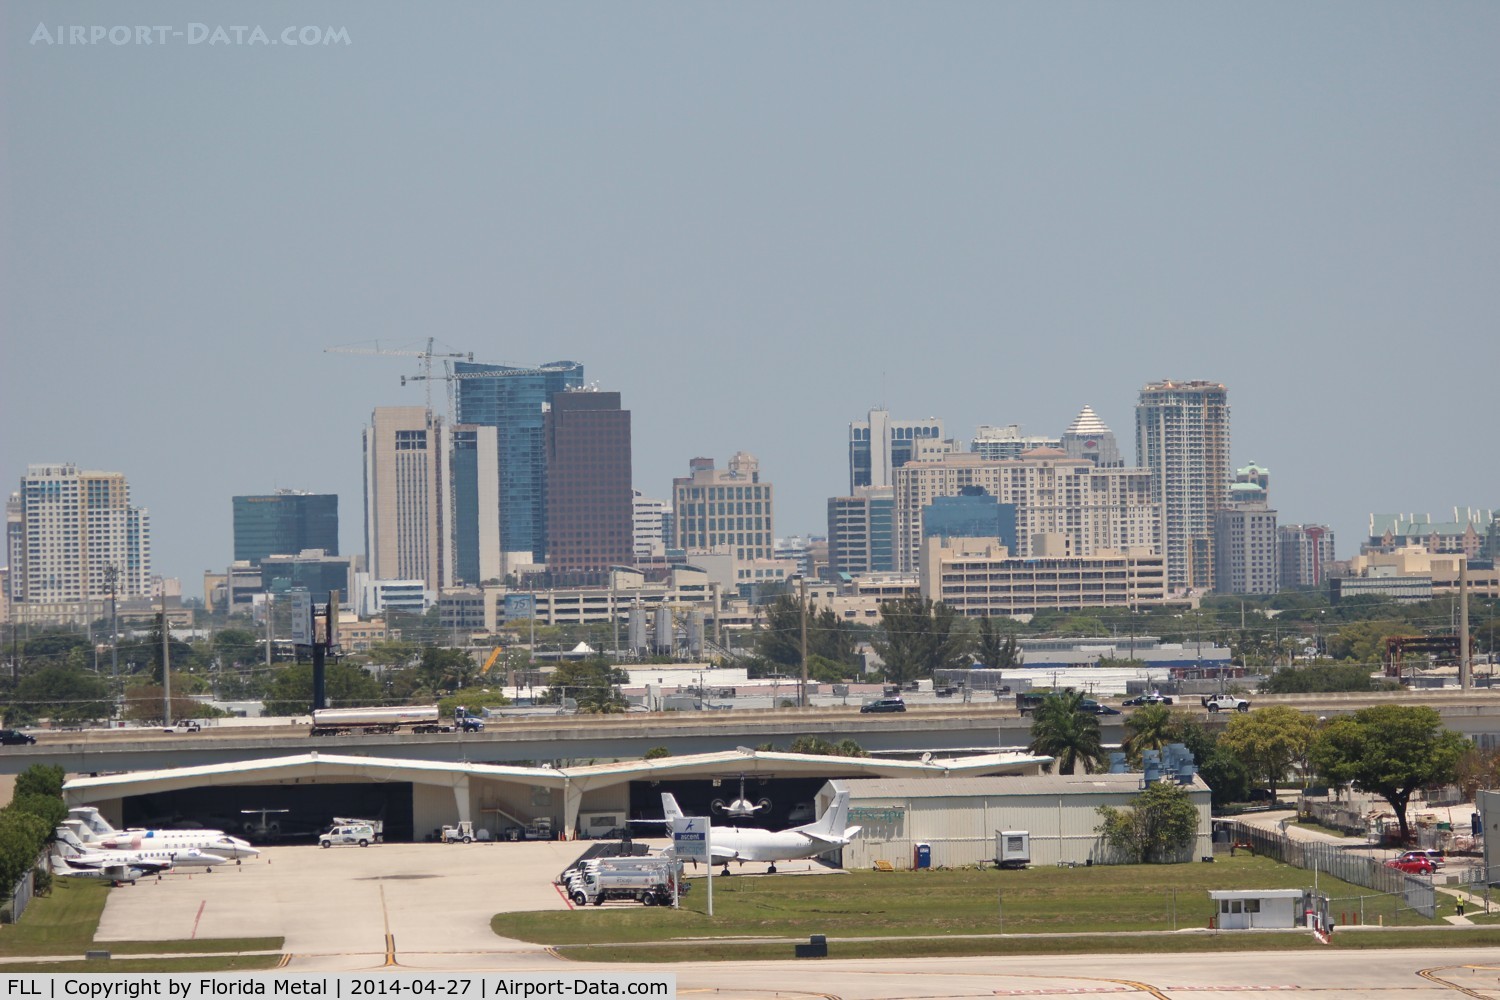 Fort Lauderdale/hollywood International Airport (FLL) - Downtown Ft Lauderdale from the terminal